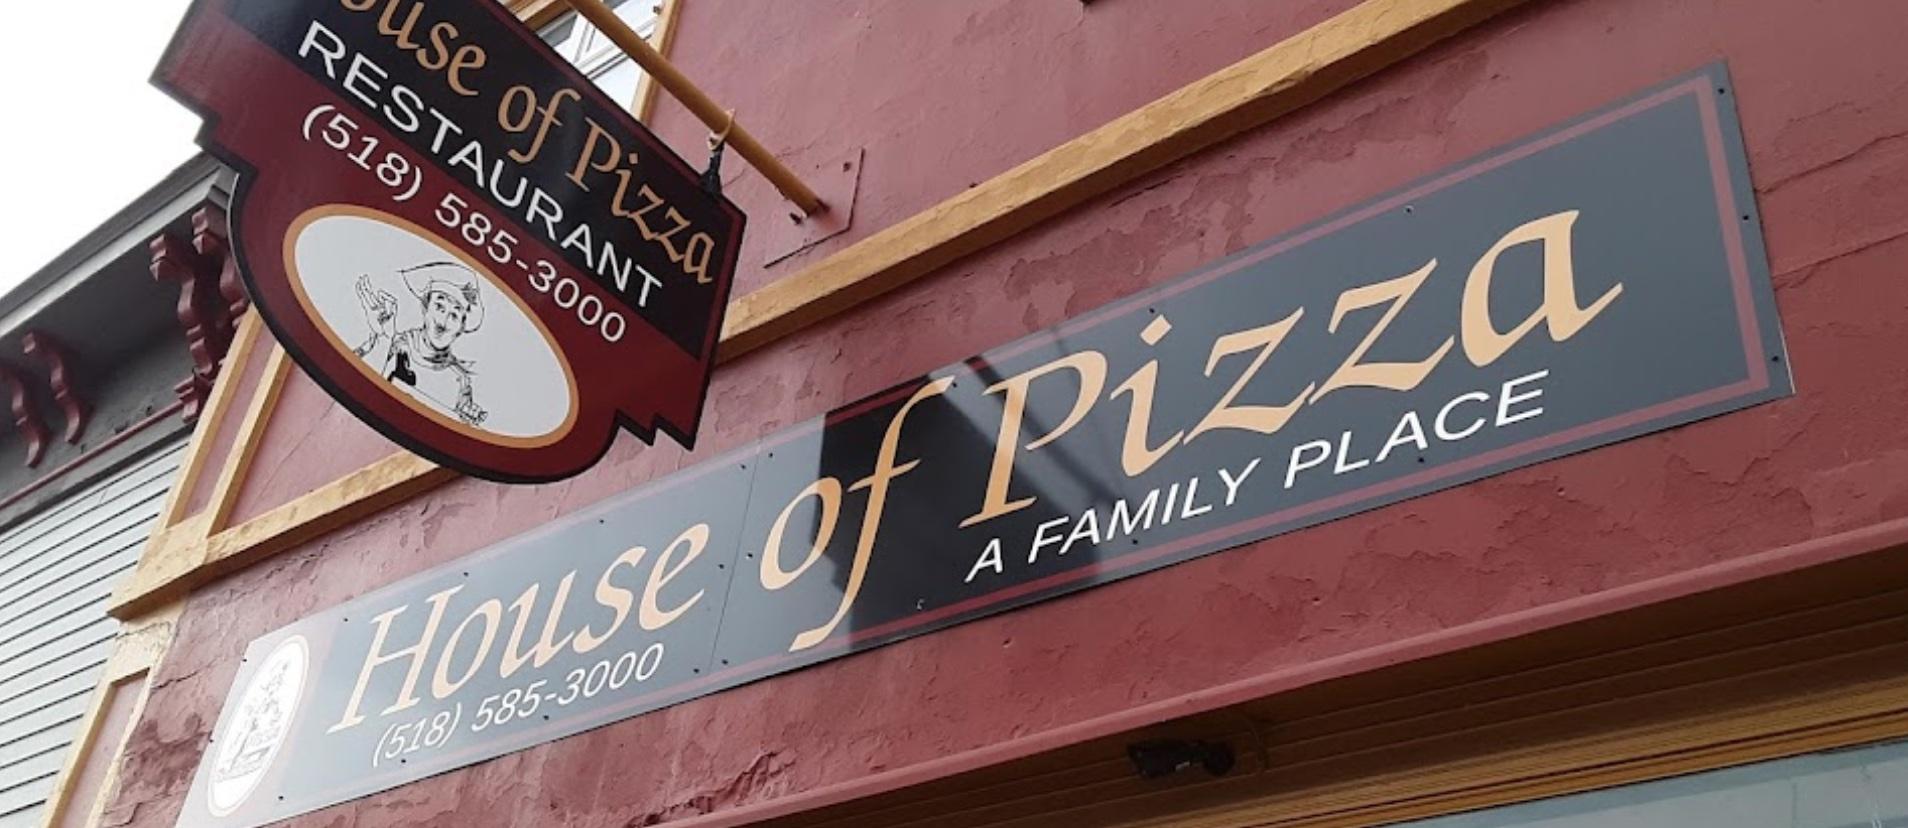 House of Pizza exterior sign